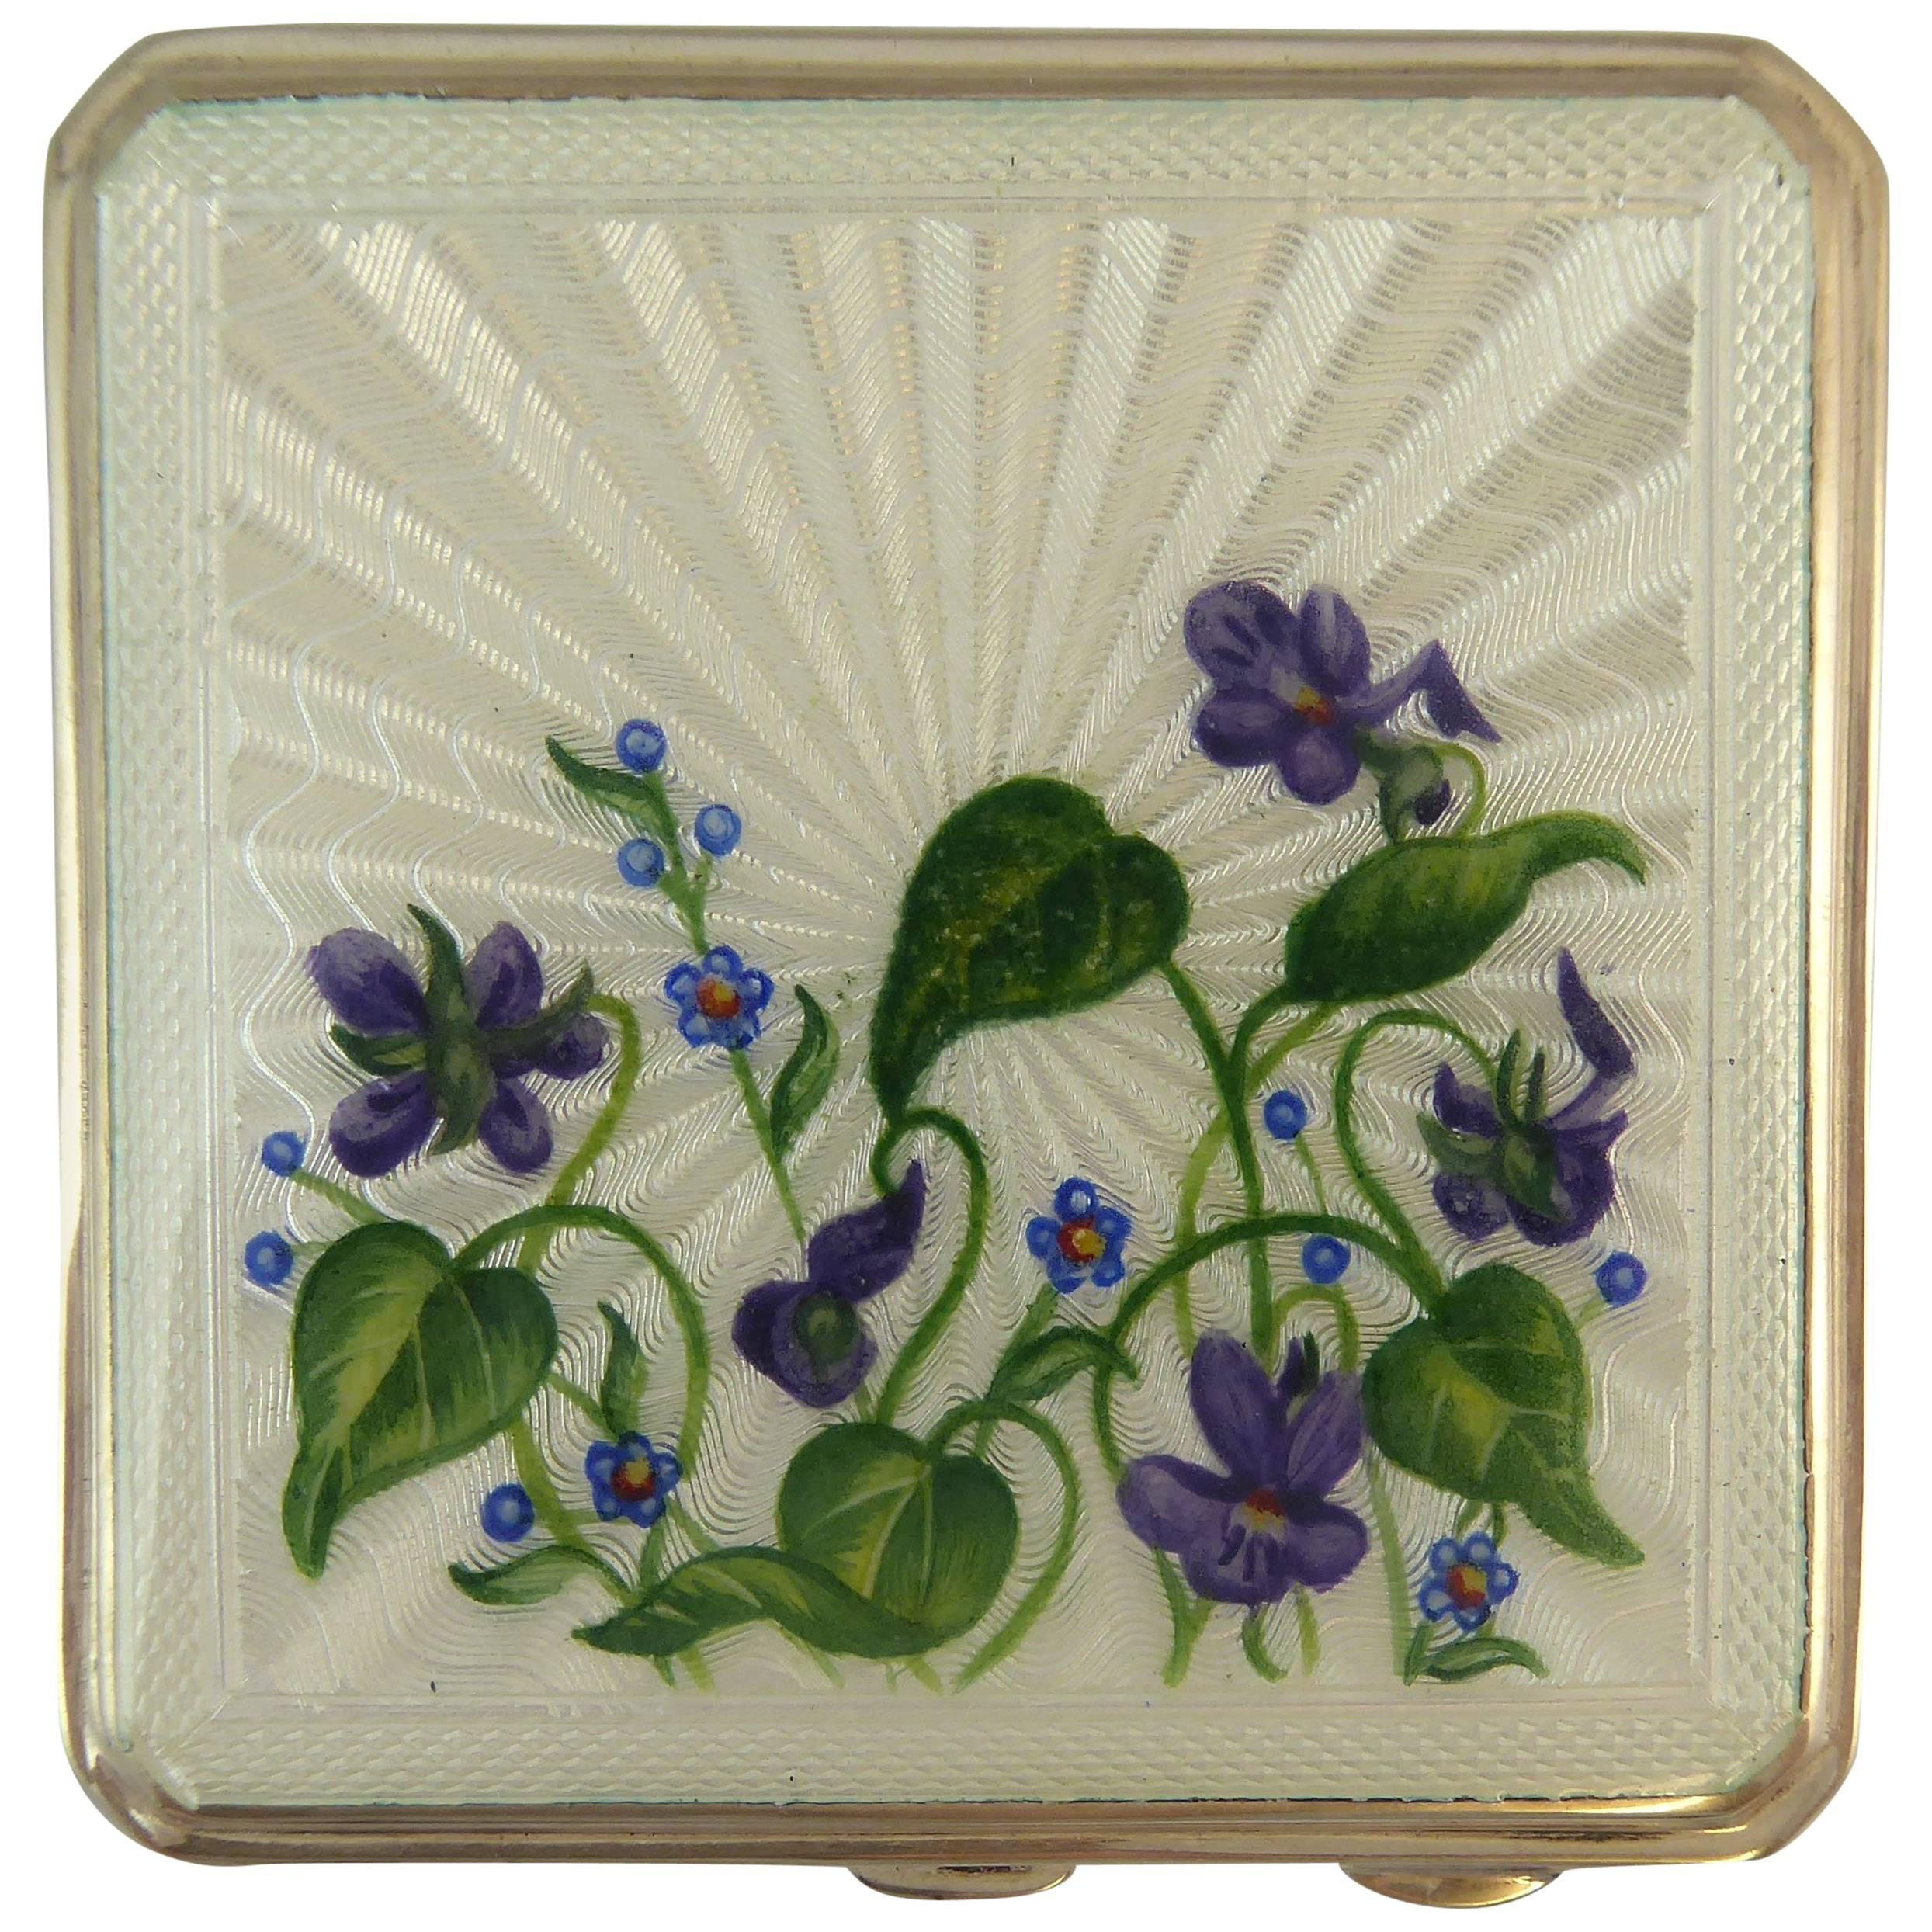 Vintage Silver & Enamelled Floral Powder Compact with Mirror, Hallmarked, 1952